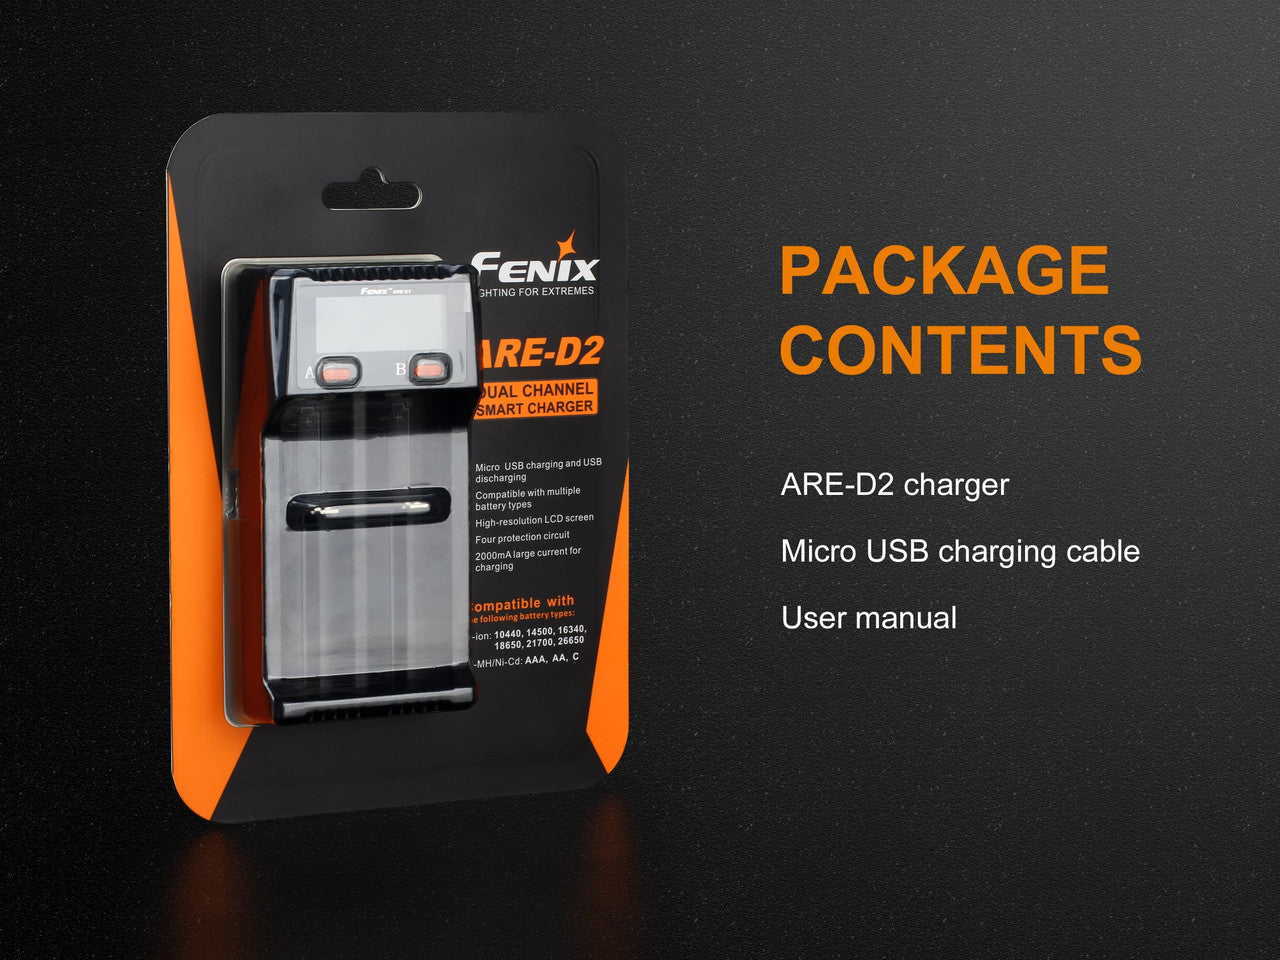 FENIX Dual Channel Smart Battery Charger ARE-D2